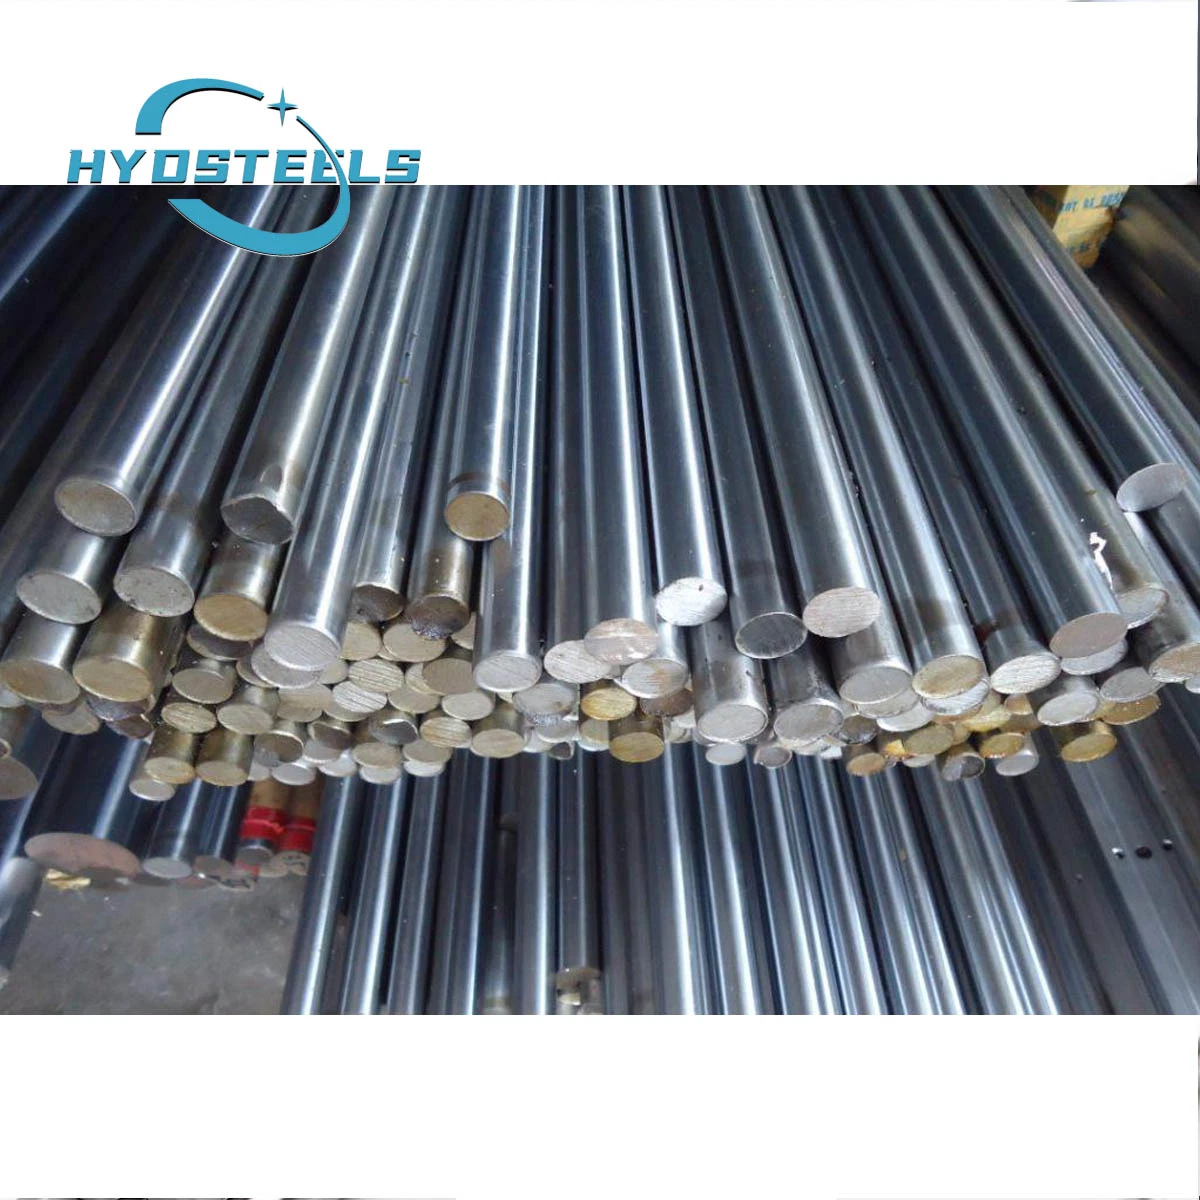 Hydraulic Cylinder Induction Hardened Steel Chromium Chrome Plated Bar Shock Absorber Piston Rod for Hydraulic Cylinder